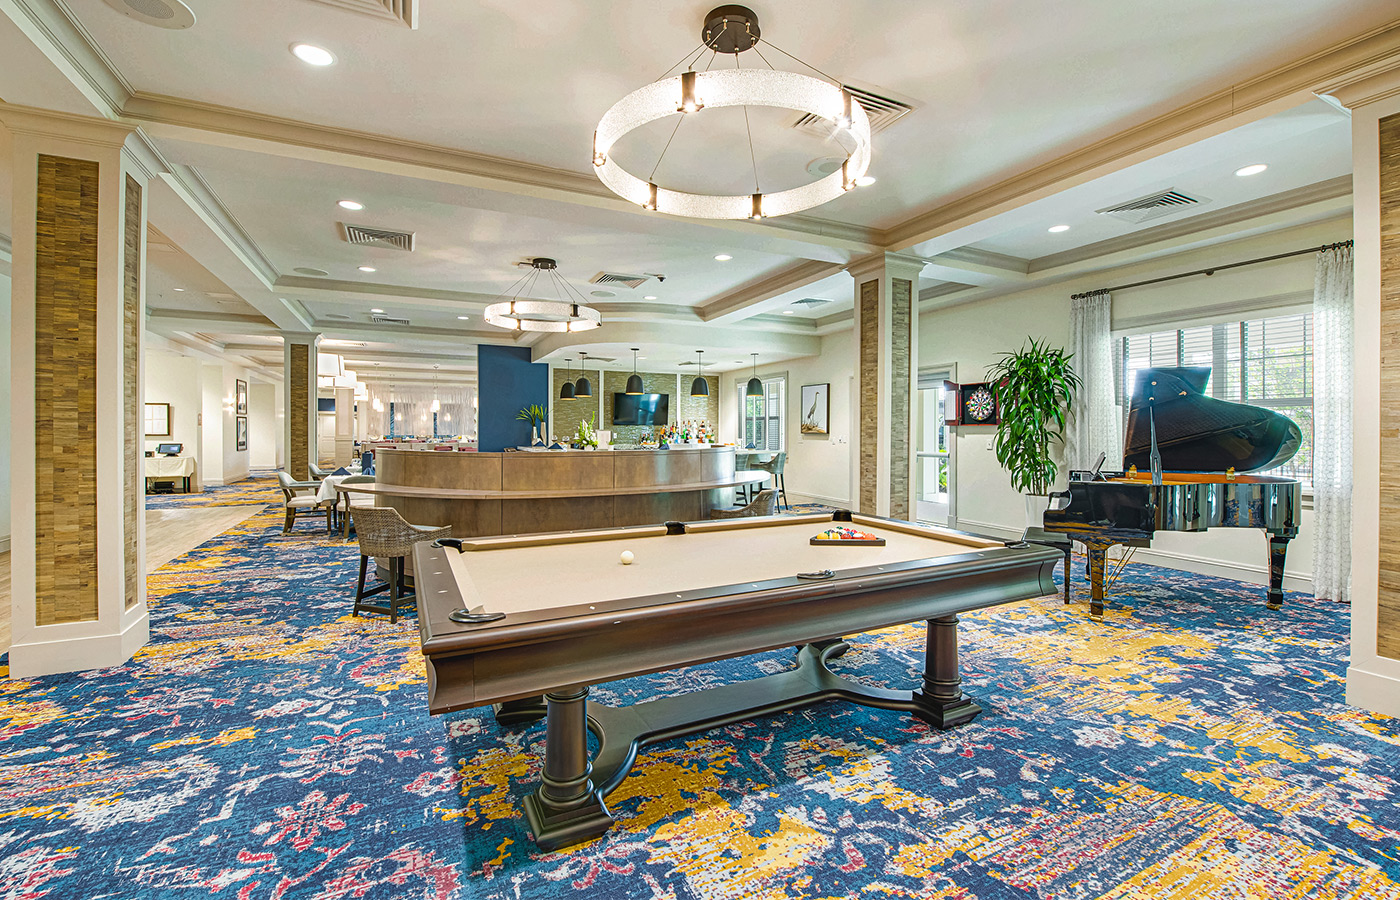 The pool table at The Watermark at Trinity.